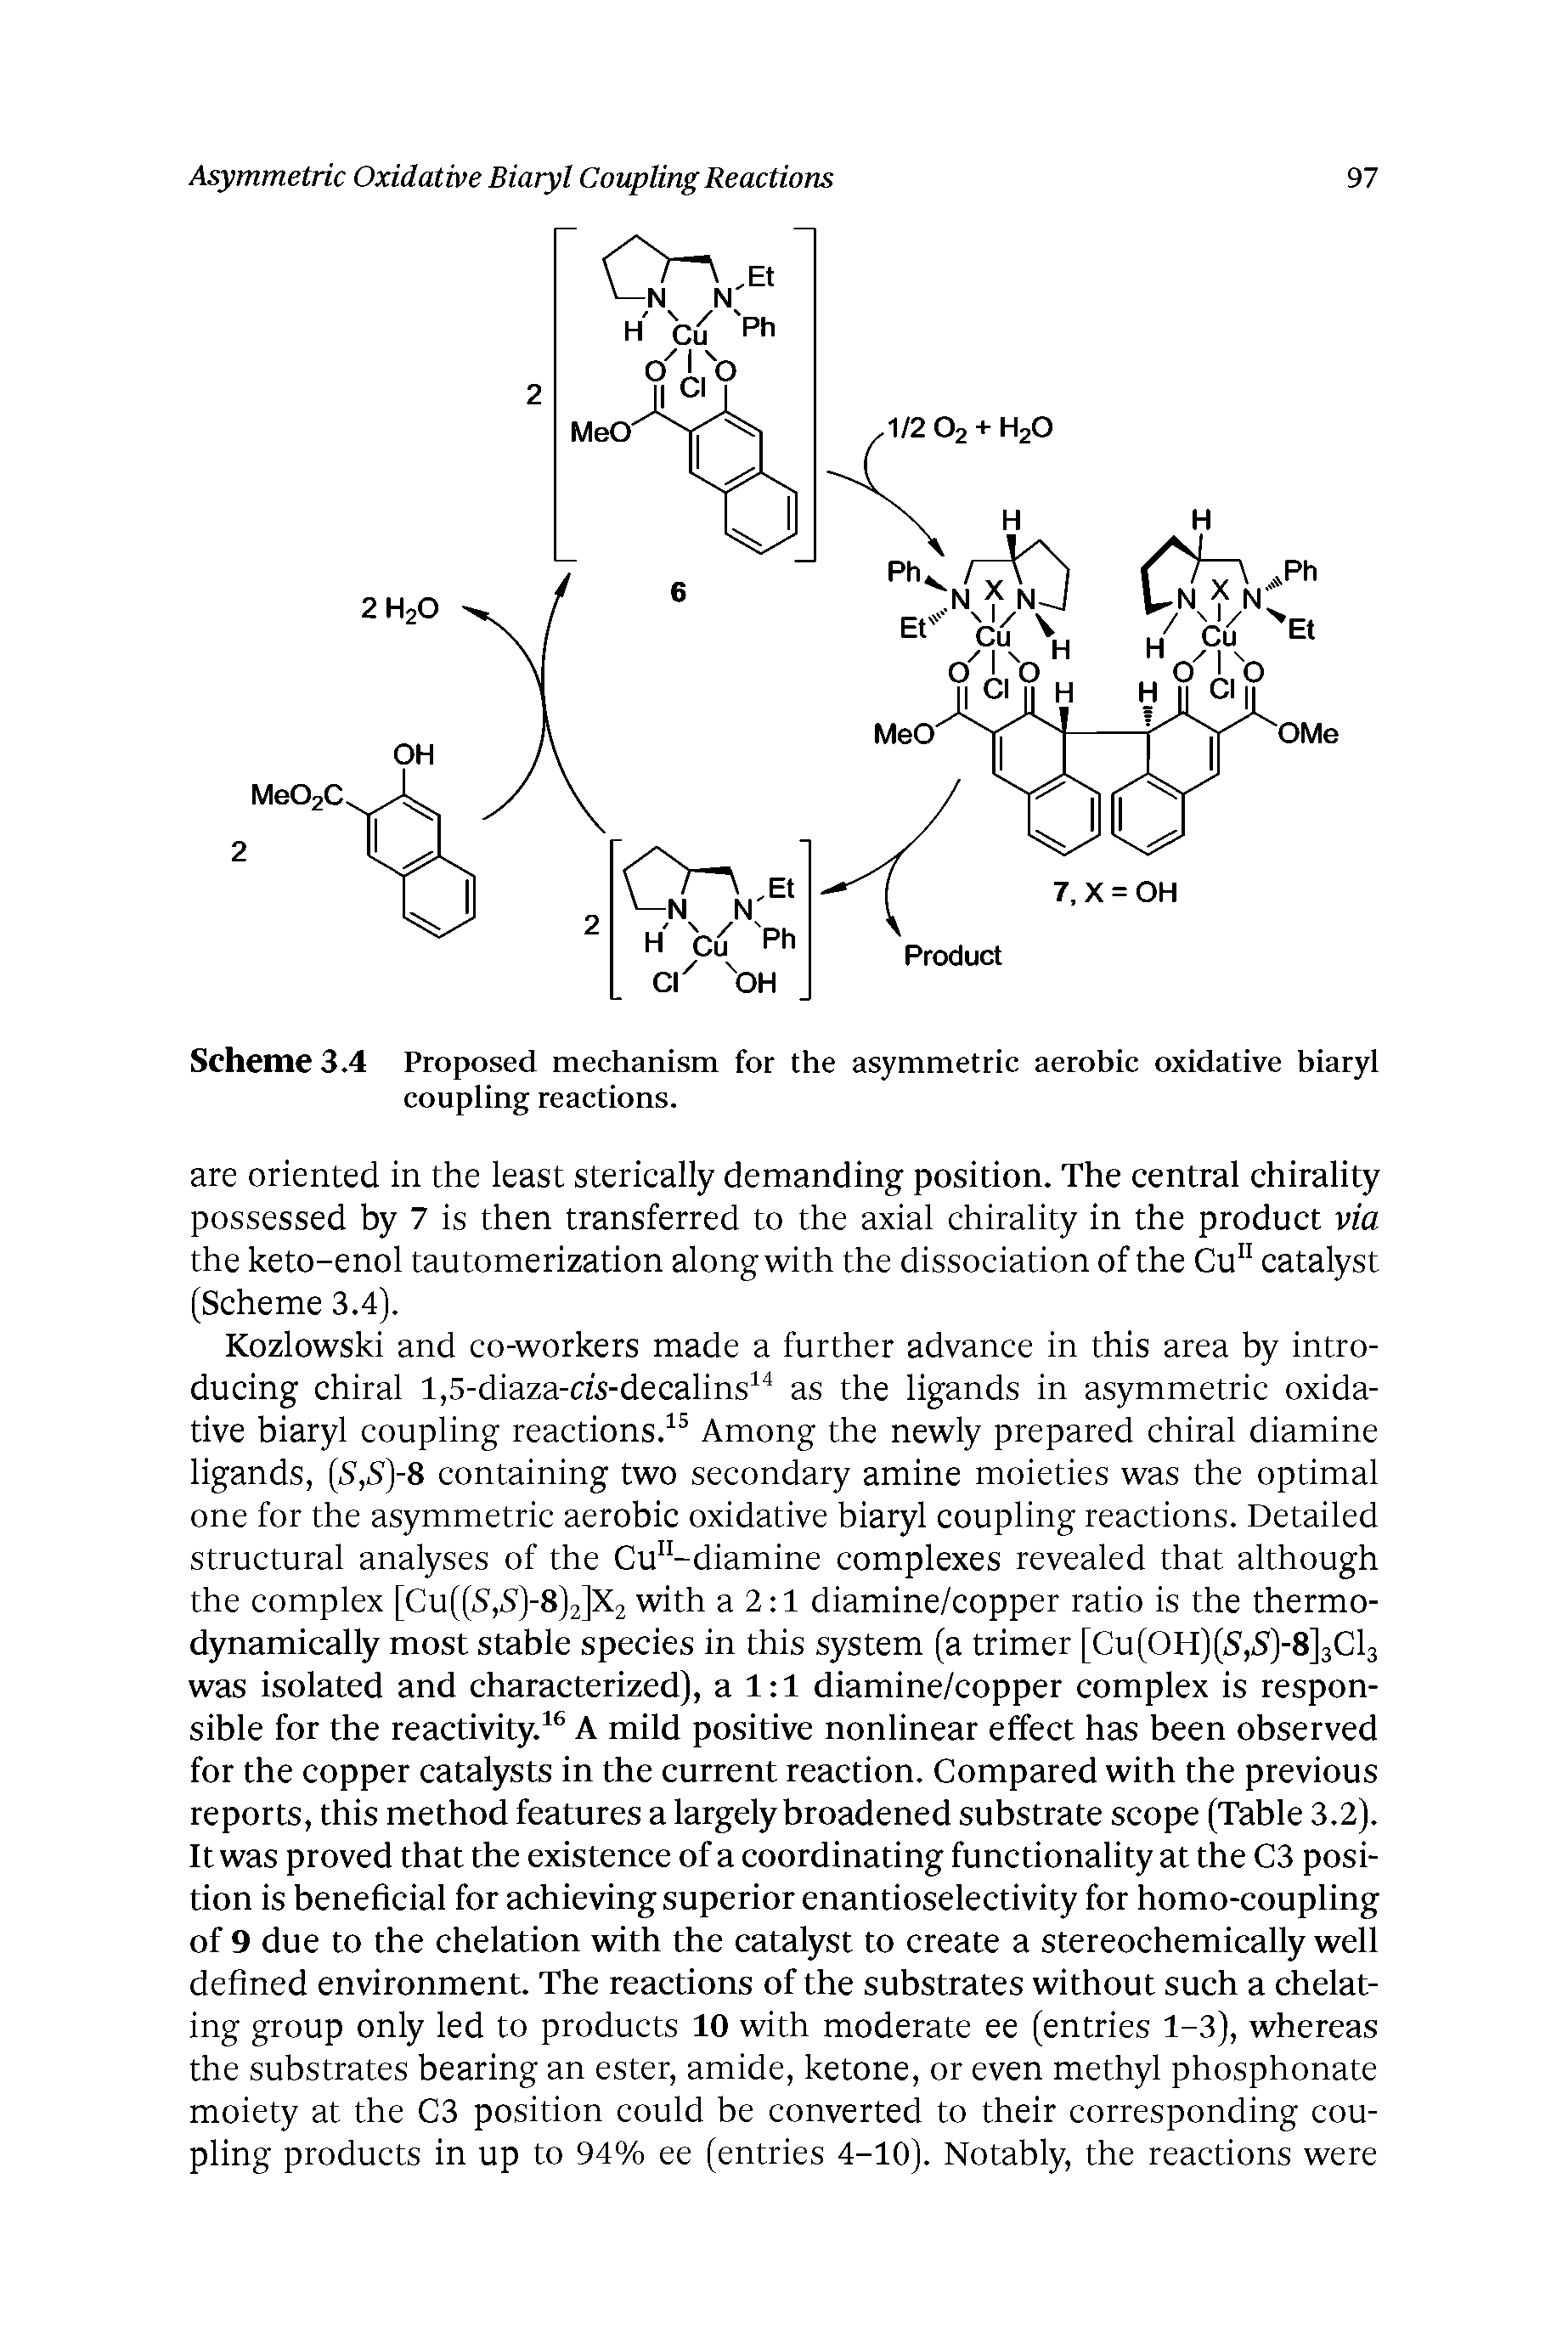 Scheme 3.4 Proposed mechanism for the asymmetric aerobic oxidative hiaryl coupling reactions.